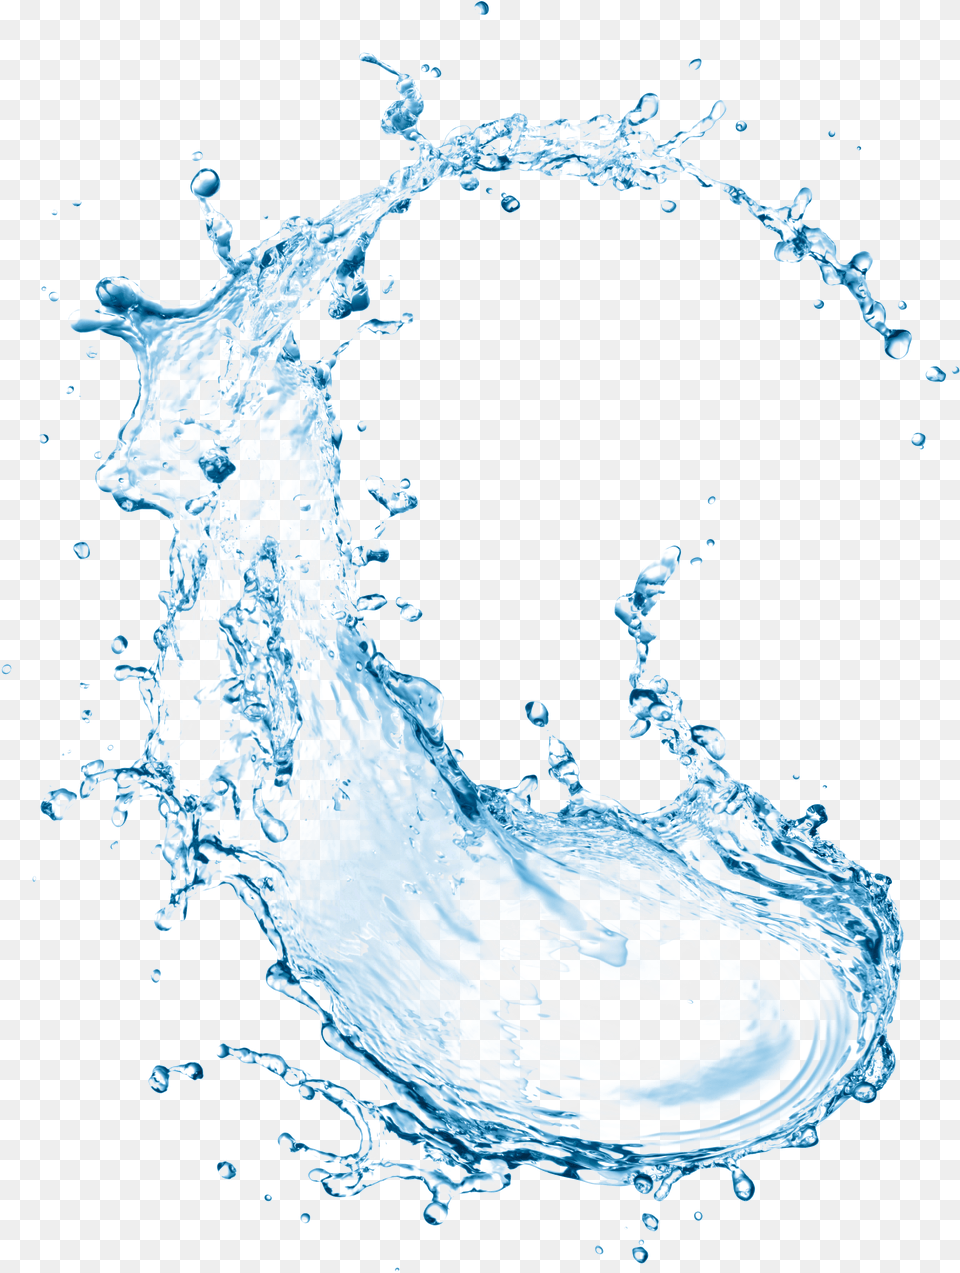 Free Drops Transparent Background Water Splash, Nature, Outdoors, Sea, Ripple Png